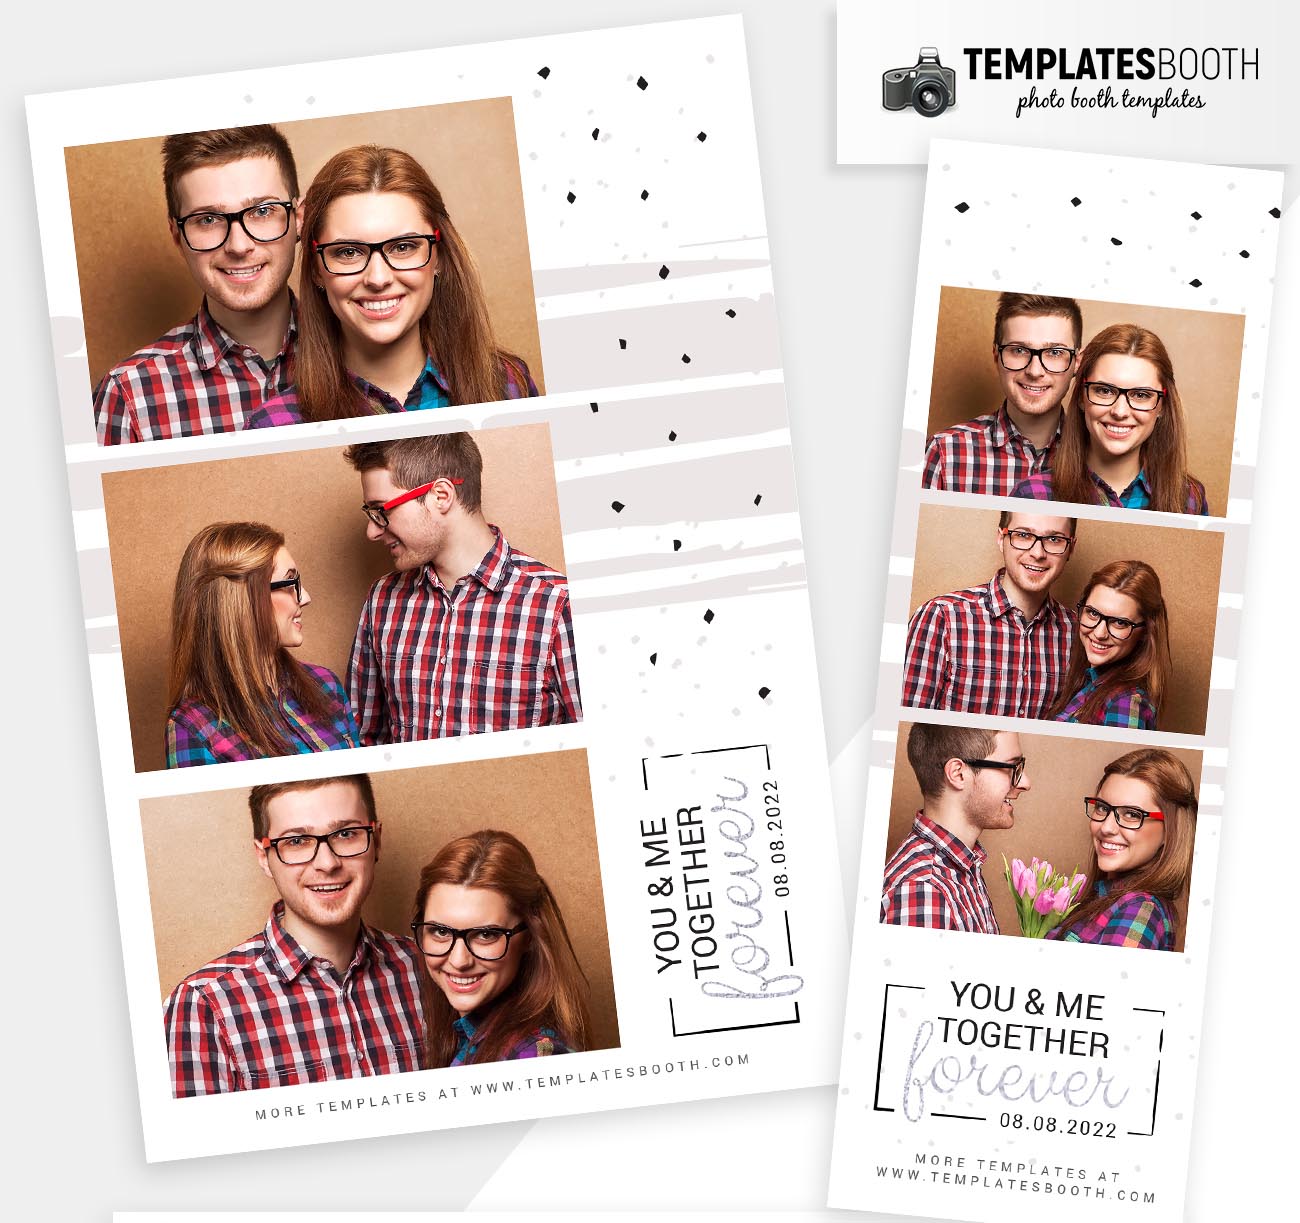 dslr photo booth templates